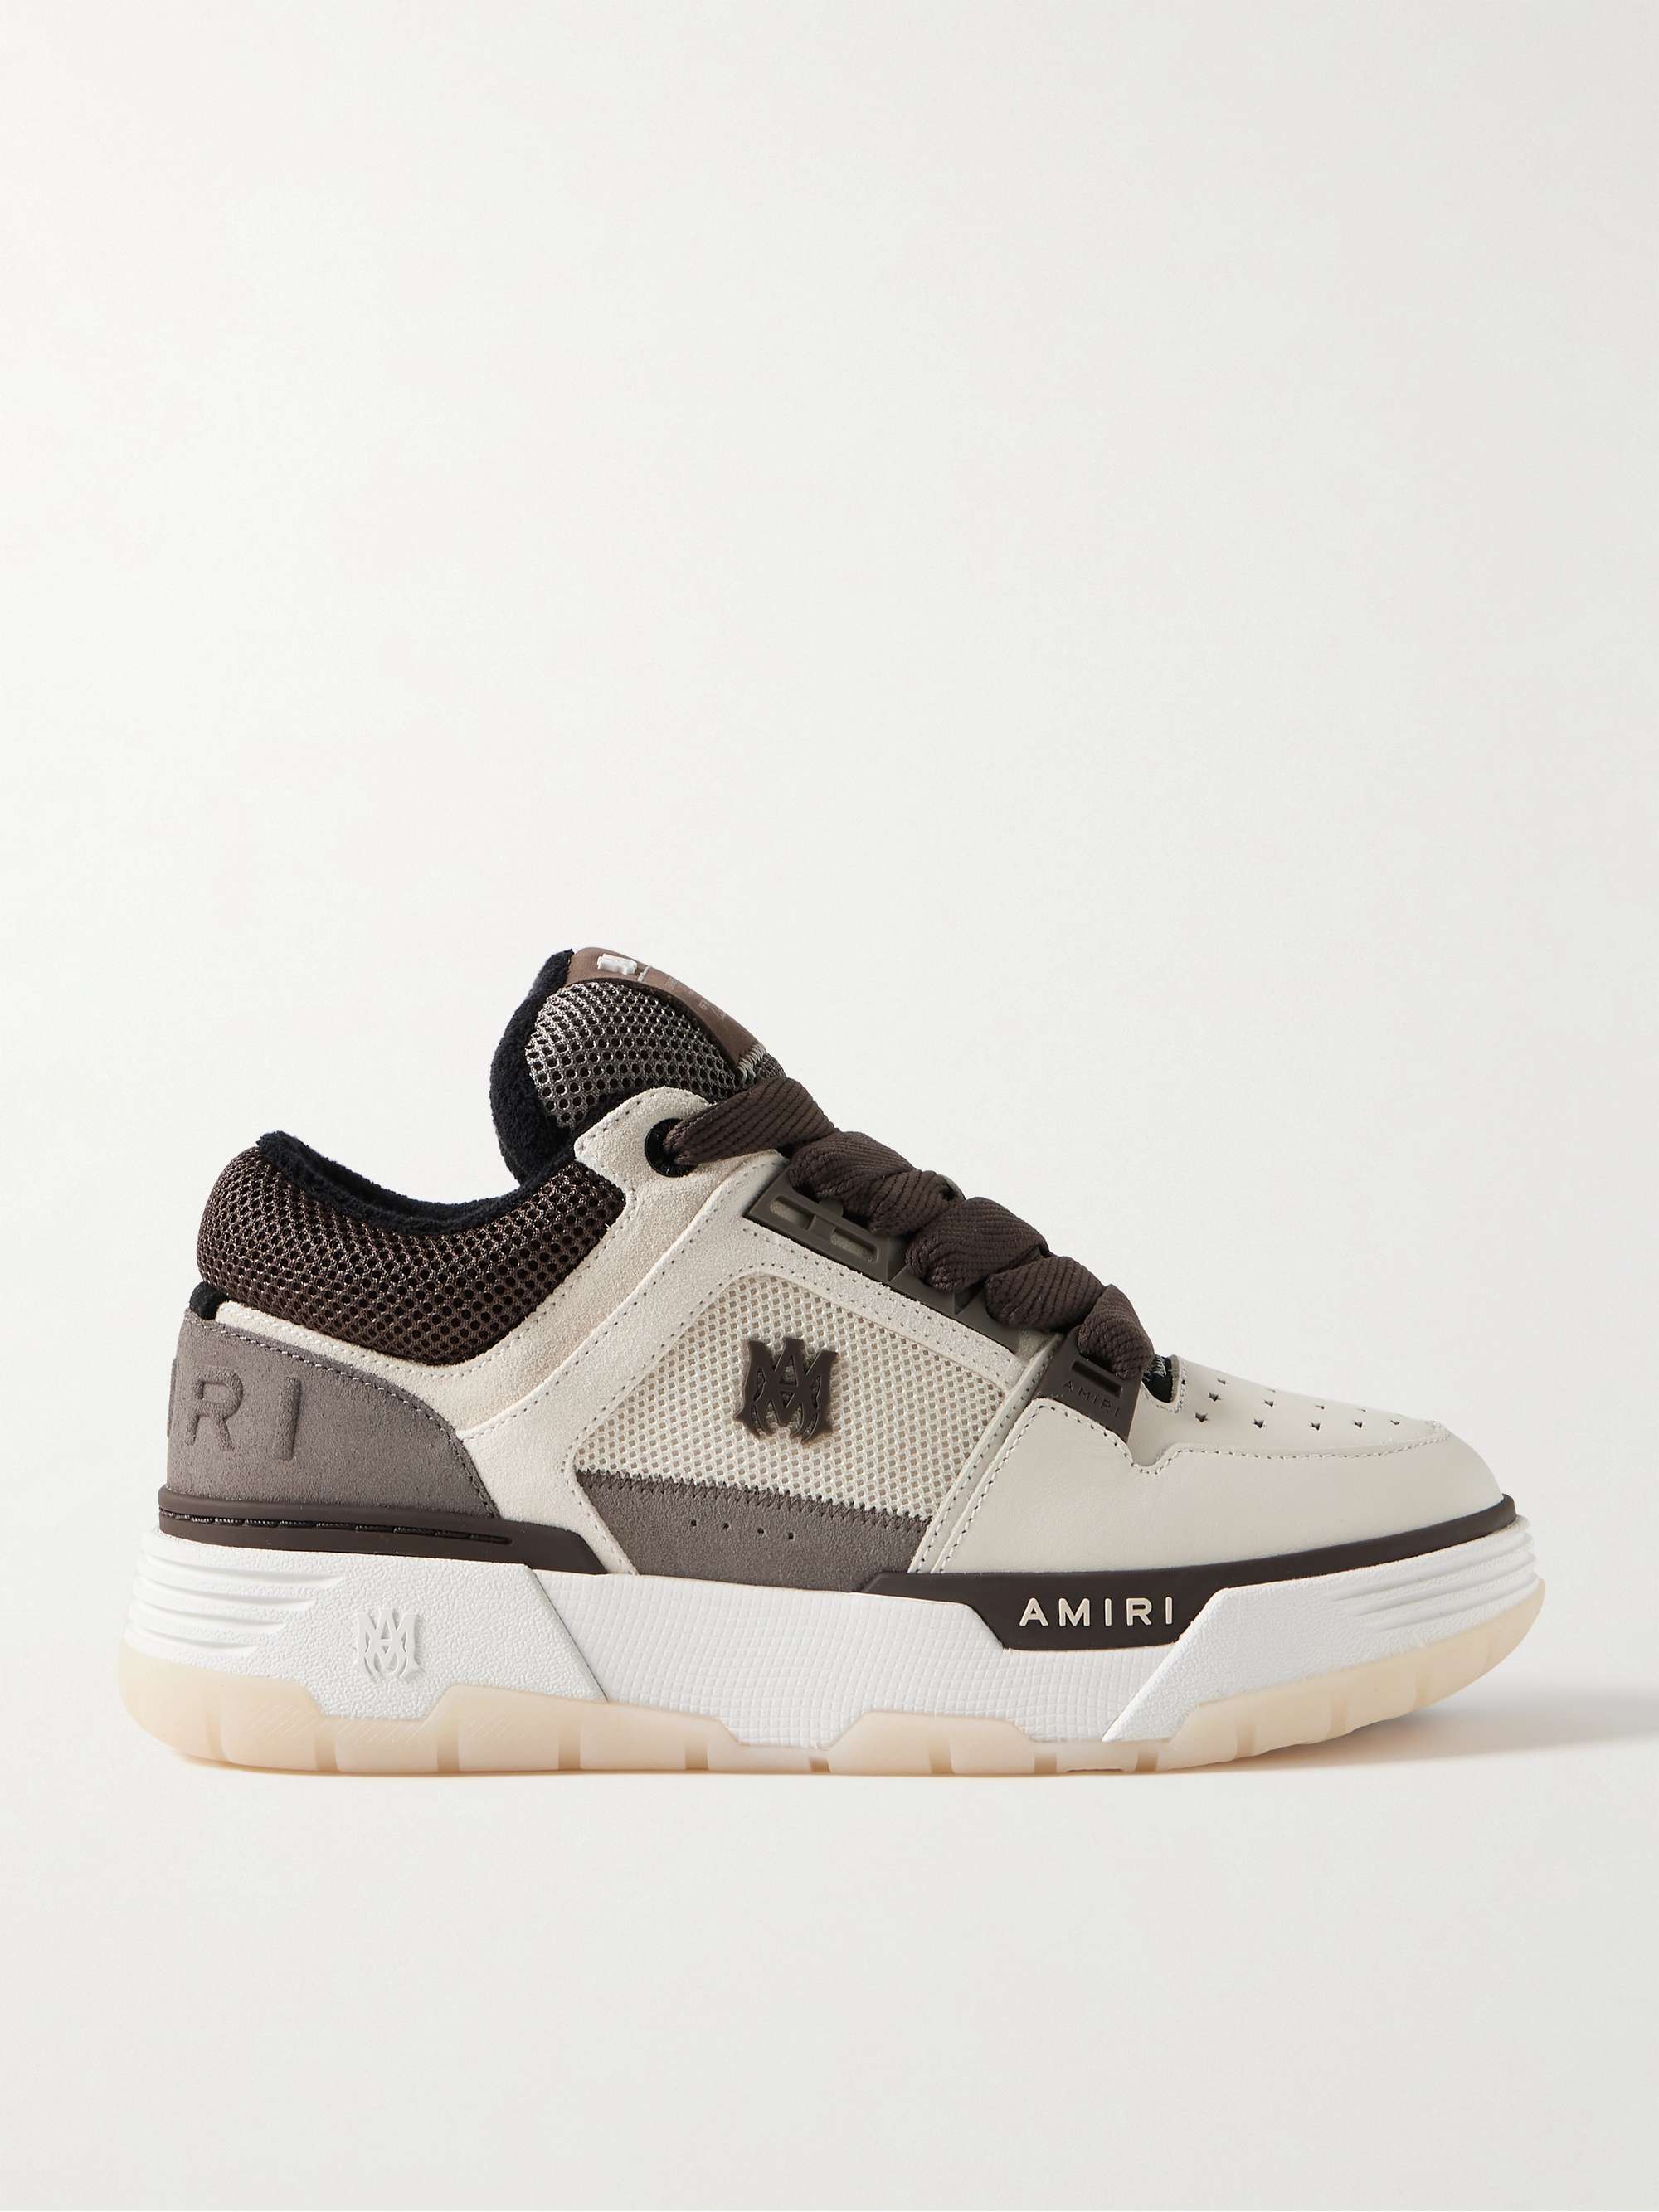 AMIRI MA-1 Mesh, Leather and Suede Sneakers for Men | MR PORTER